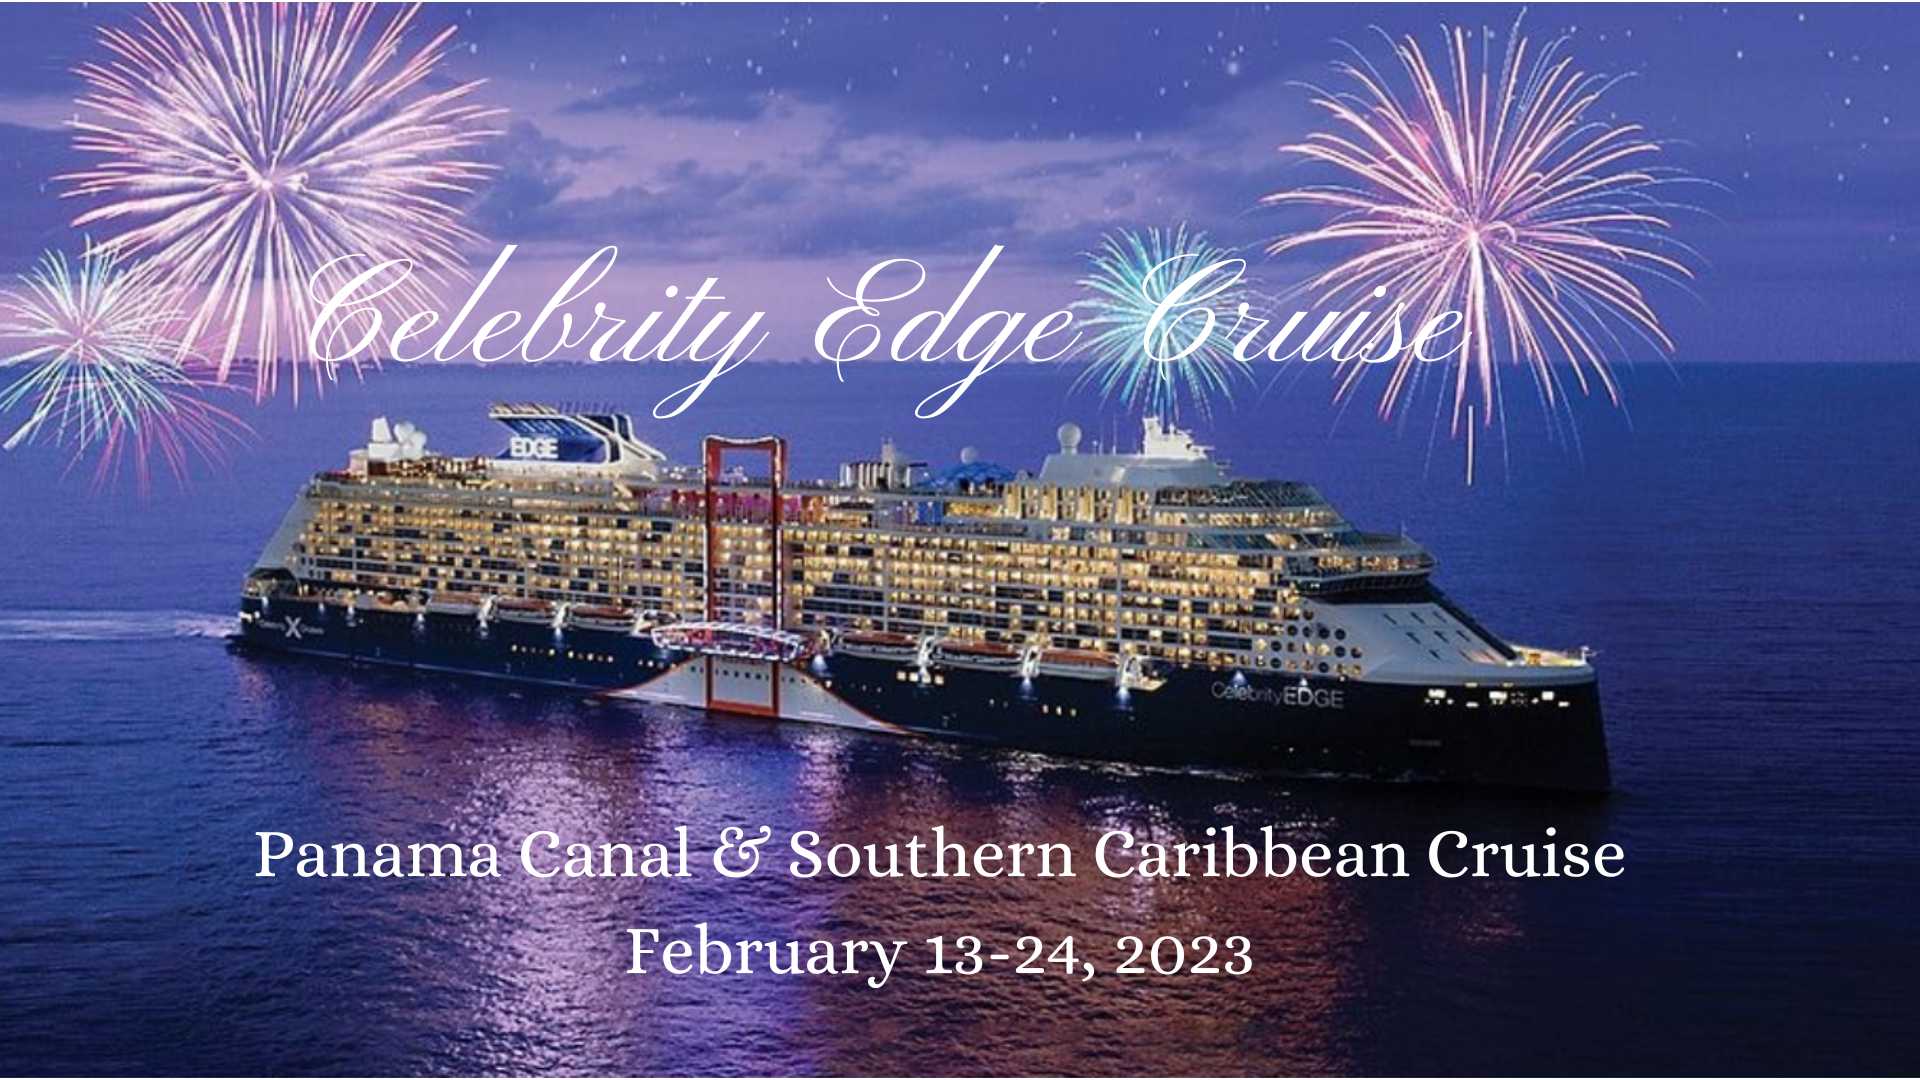 Panama Canal and Southern Caribbean Cruise